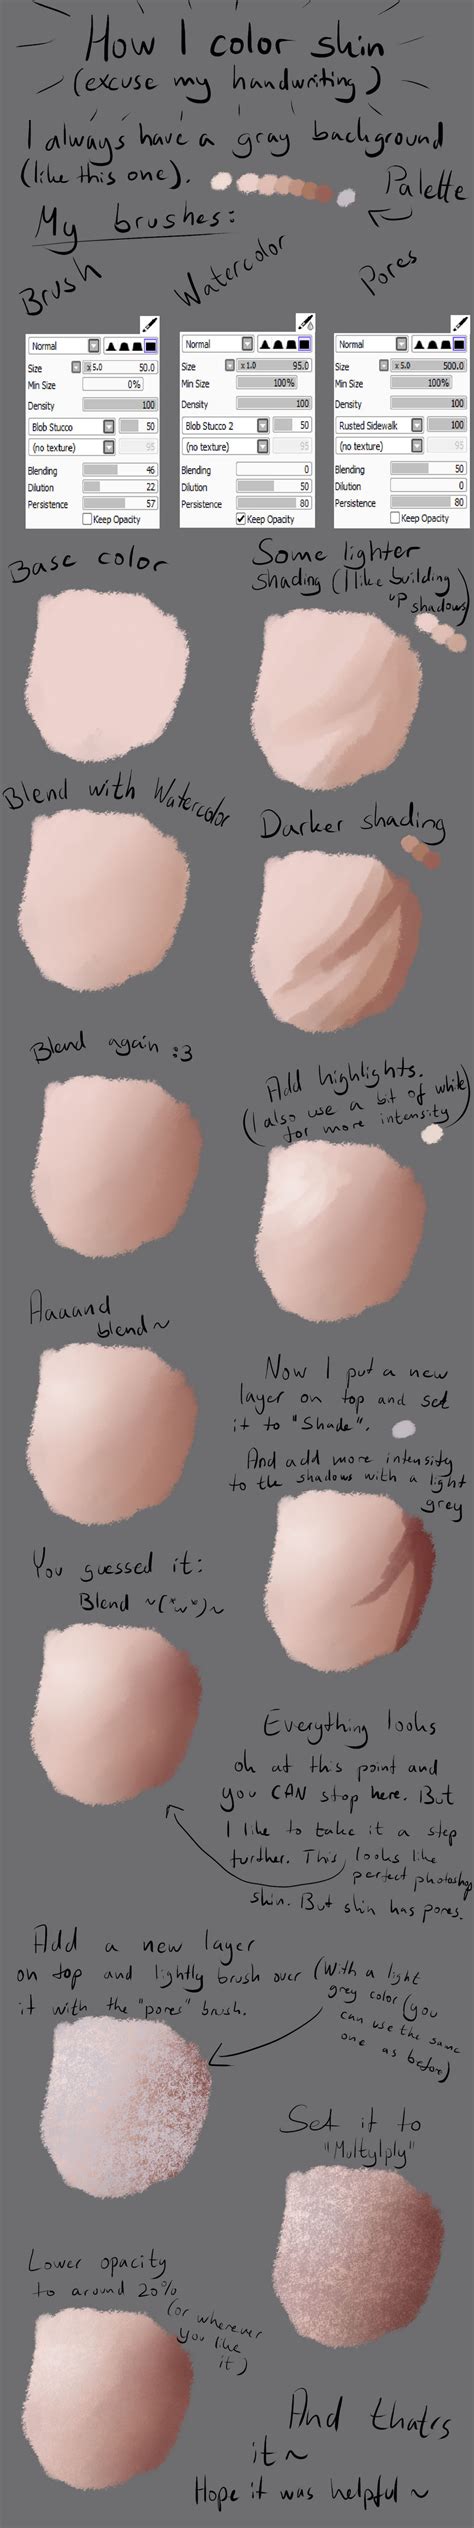 Tutorial Painting Skin In Paint Tool Sai By Astragami Sama On Deviantart